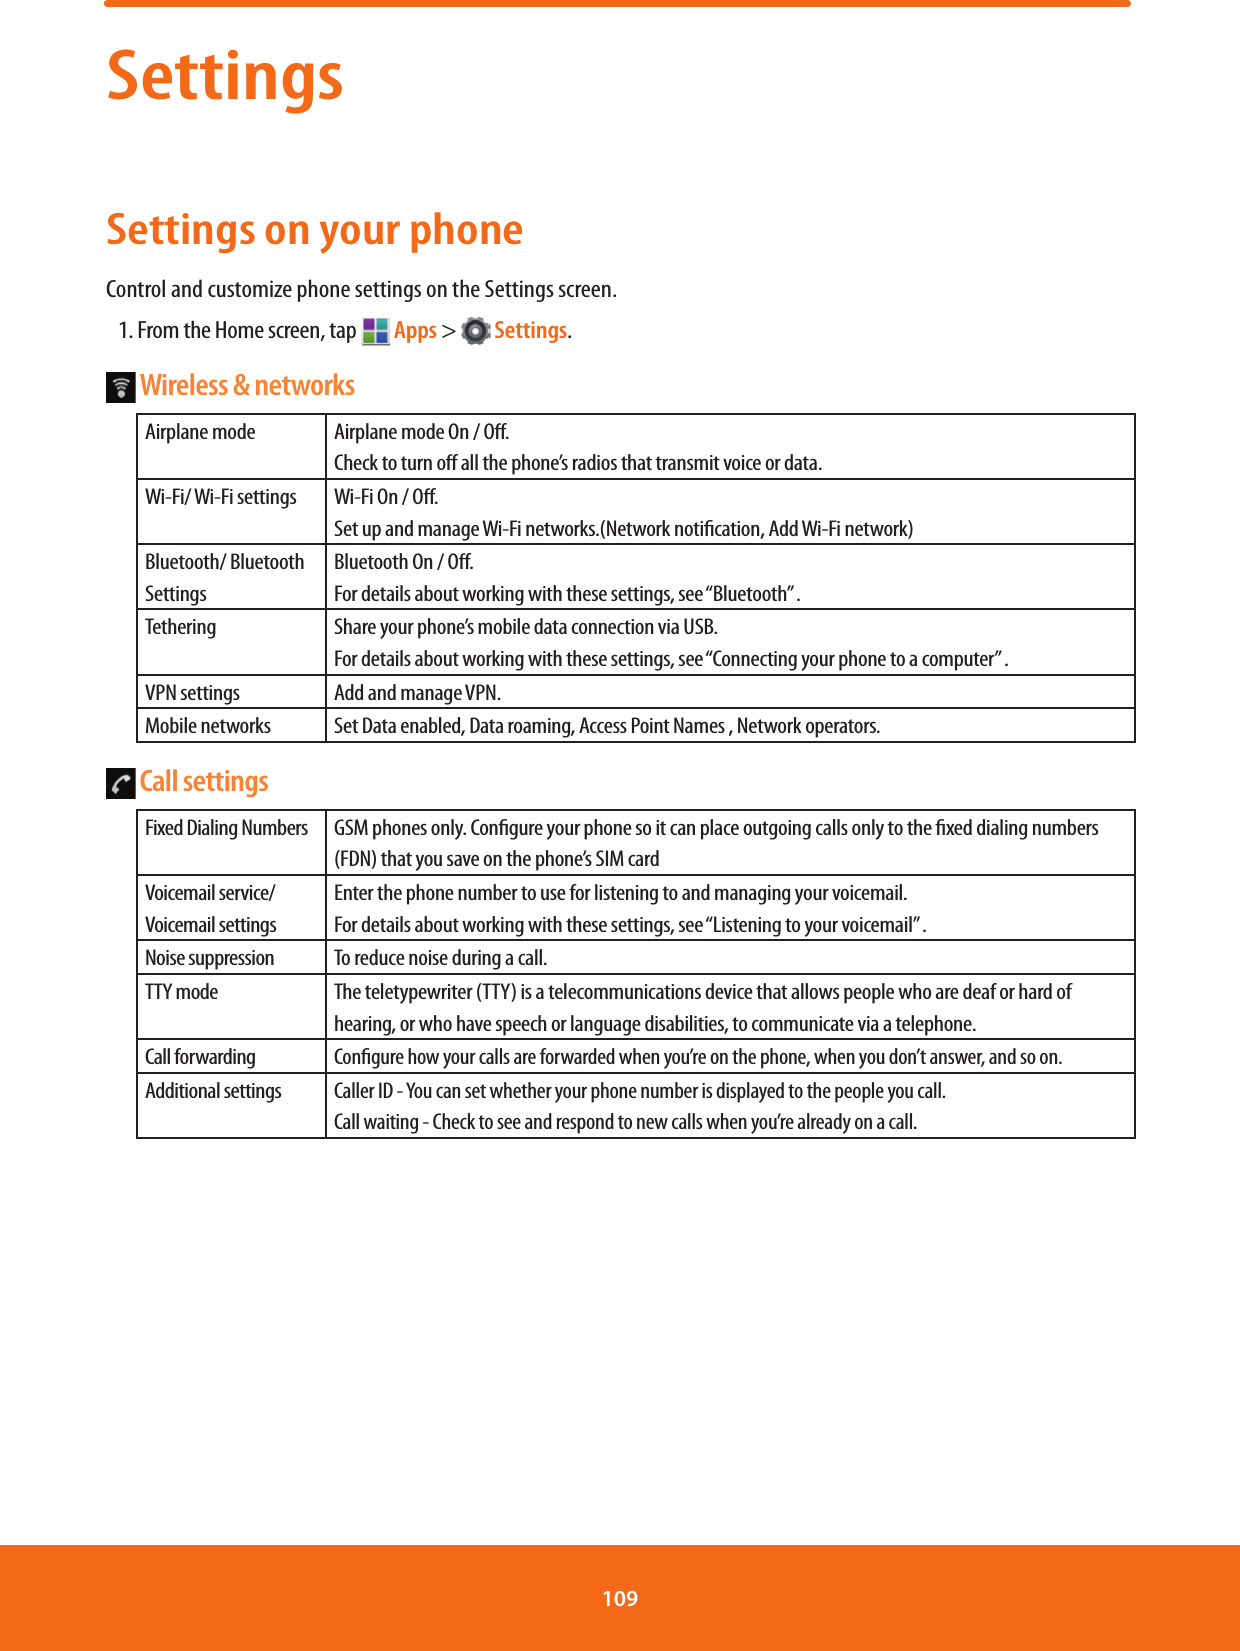 SettingsSettings on your phoneControl and customize phone settings on the Settings screen.1. From the Home screen, tap   Apps &gt;   Settings. Wireless &amp; networks  Airplane mode Airplane mode On / O.  Check to turn o all the phone’s radios that transmit voice or data.Wi-Fi/ Wi-Fi settings Wi-Fi On / O. Set up and manage Wi-Fi networks.(Network notication, Add Wi-Fi network)Bluetooth/ Bluetooth SettingsBluetooth On / O. For details about working with these settings, see “Bluetooth” .Tethering Share your phone’s mobile data connection via USB. For details about working with these settings, see “Connecting your phone to a computer” .VPN settings Add and manage VPN.Mobile networks Set Data enabled, Data roaming, Access Point Names , Network operators. Call settings  Fixed Dialing Numbers GSM phones only. Congure your phone so it can place outgoing calls only to the xed dialing numbers (FDN) that you save on the phone’s SIM cardVoicemail service/Voicemail settingsEnter the phone number to use for listening to and managing your voicemail.For details about working with these settings, see “Listening to your voicemail” .Noise suppression To reduce noise during a call.TTY mode The teletypewriter (TTY) is a telecommunications device that allows people who are deaf or hard of hearing, or who have speech or language disabilities, to communicate via a telephone.Call forwardingCongure how your calls are forwarded when you’re on the phone, when you don’t answer, and so on.Additional settingsCaller ID - You can set whether your phone number is displayed to the people you call.Call waiting - Check to see and respond to new calls when you’re already on a call.109 